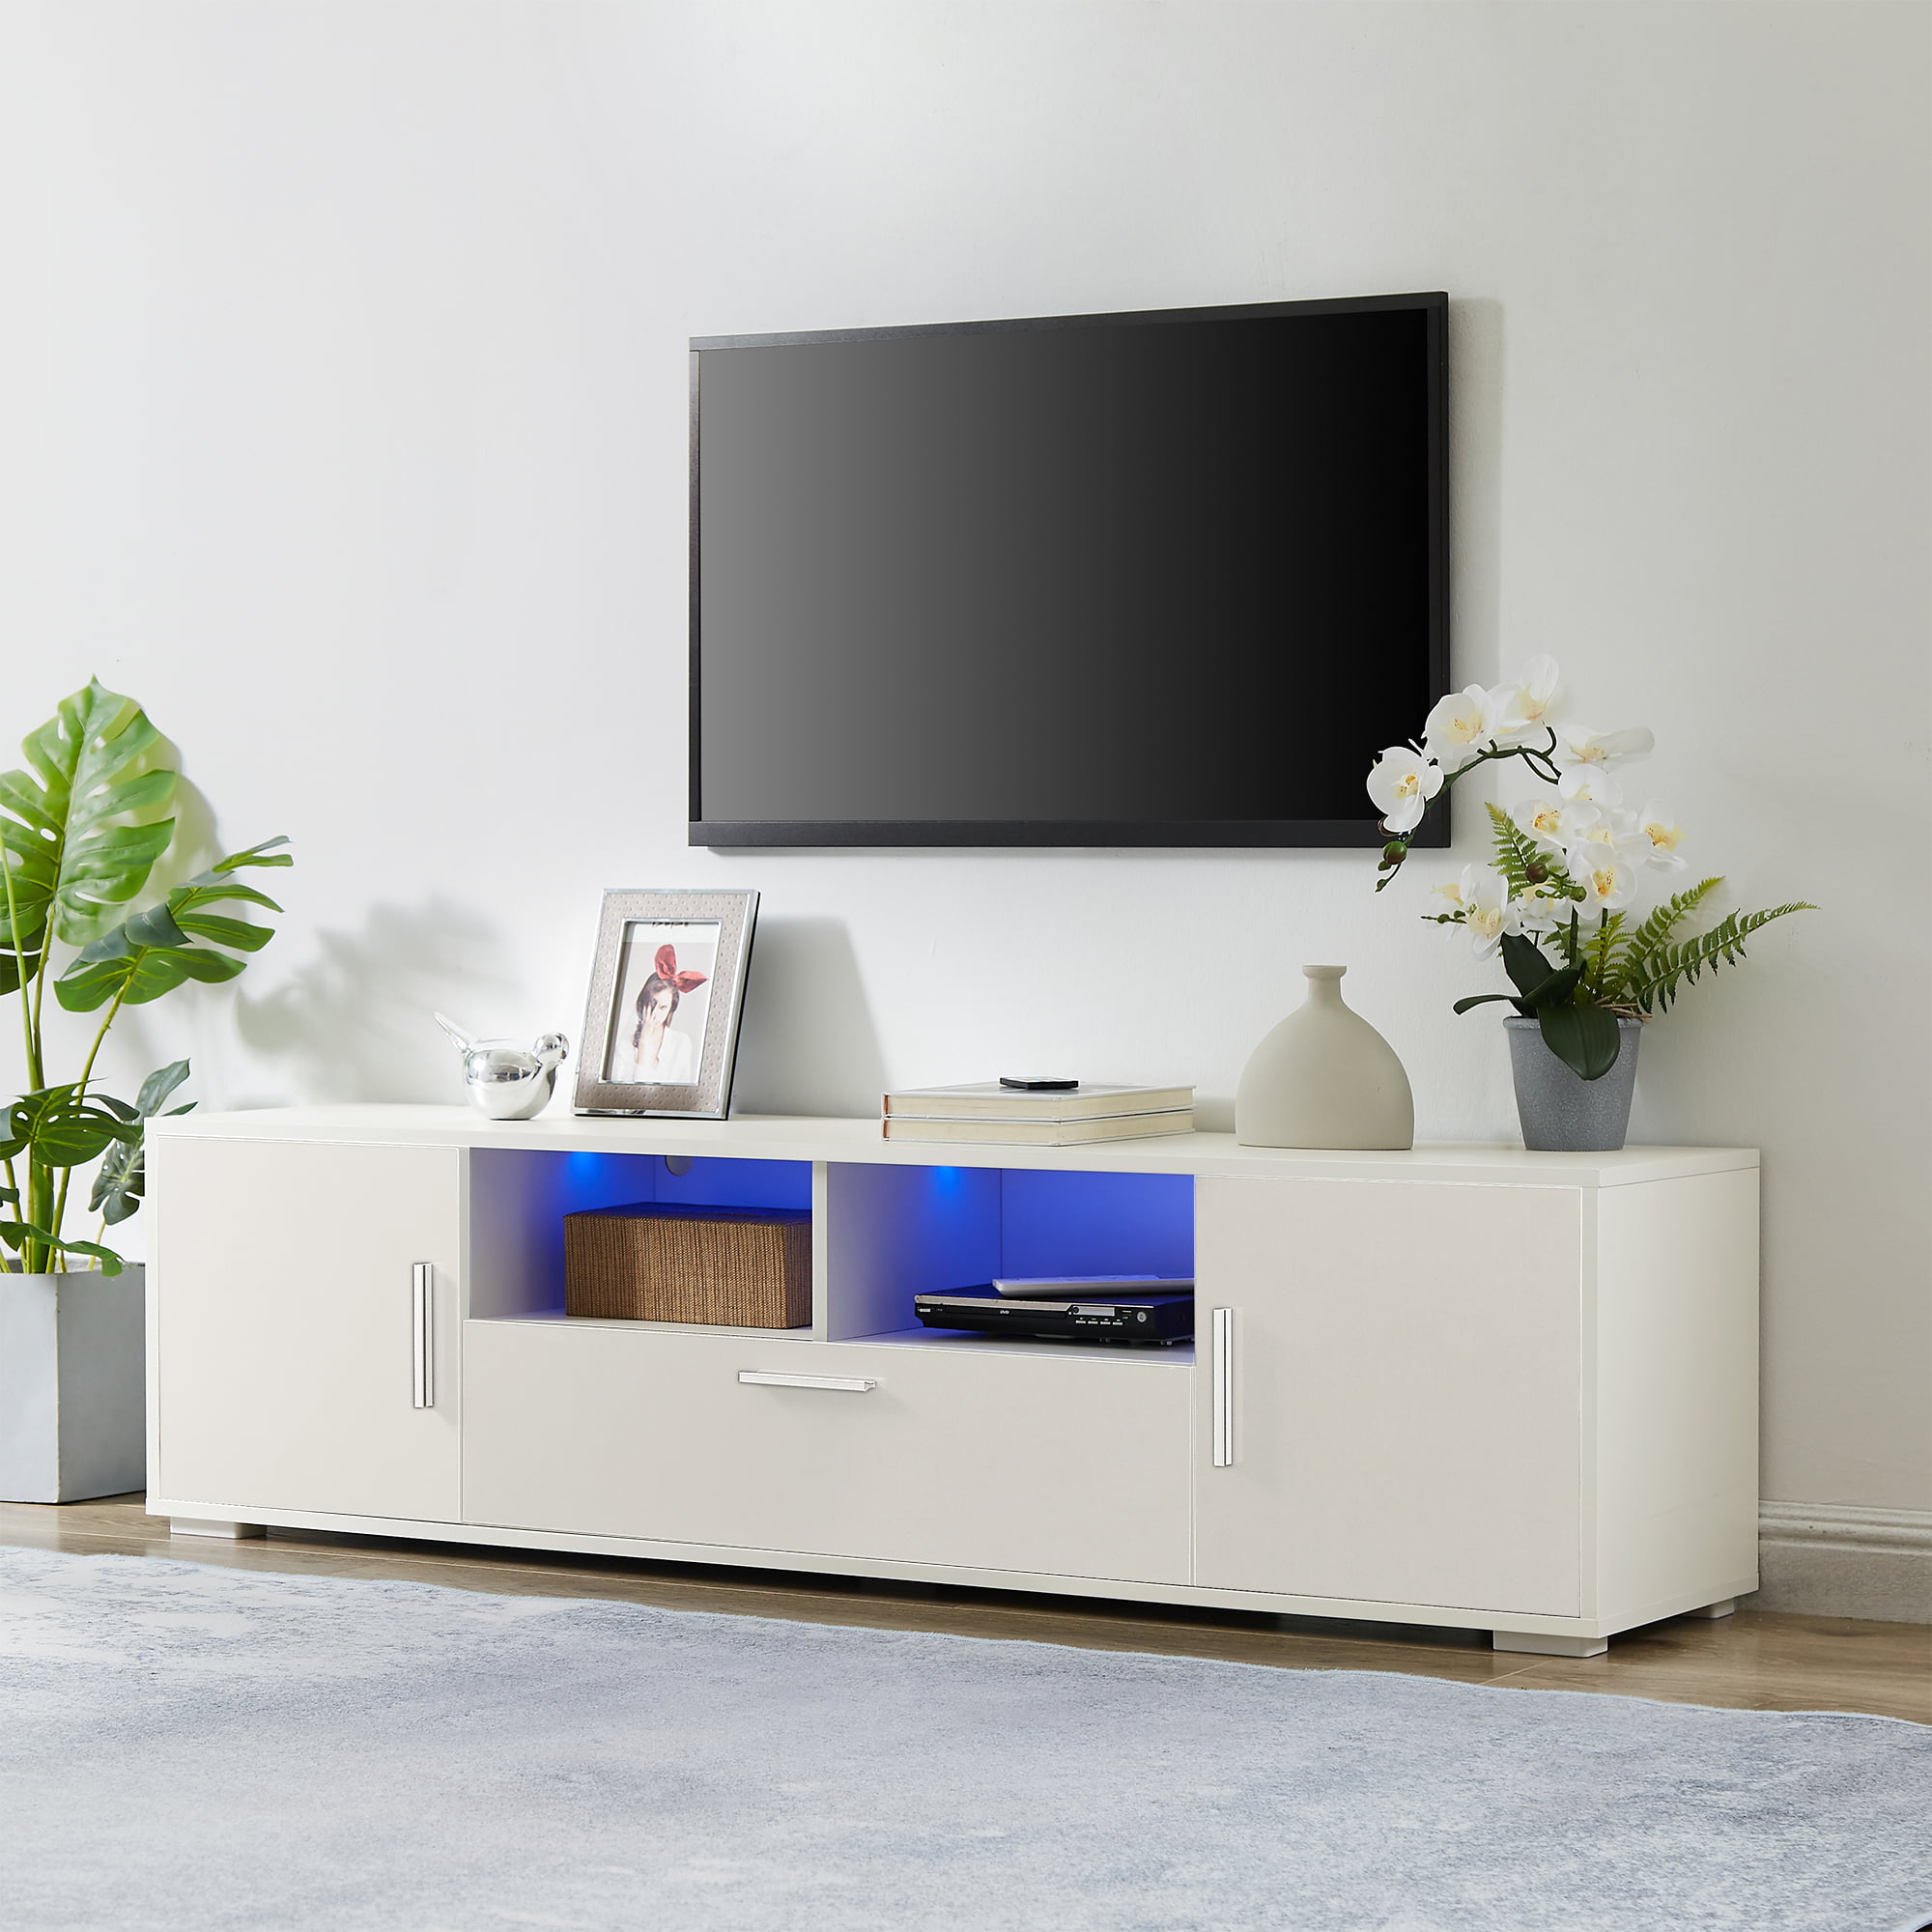 Details about   TV Stand High Gloss Entertainment Unit Console Cabinet w/ RGB LED for 70'' TV 